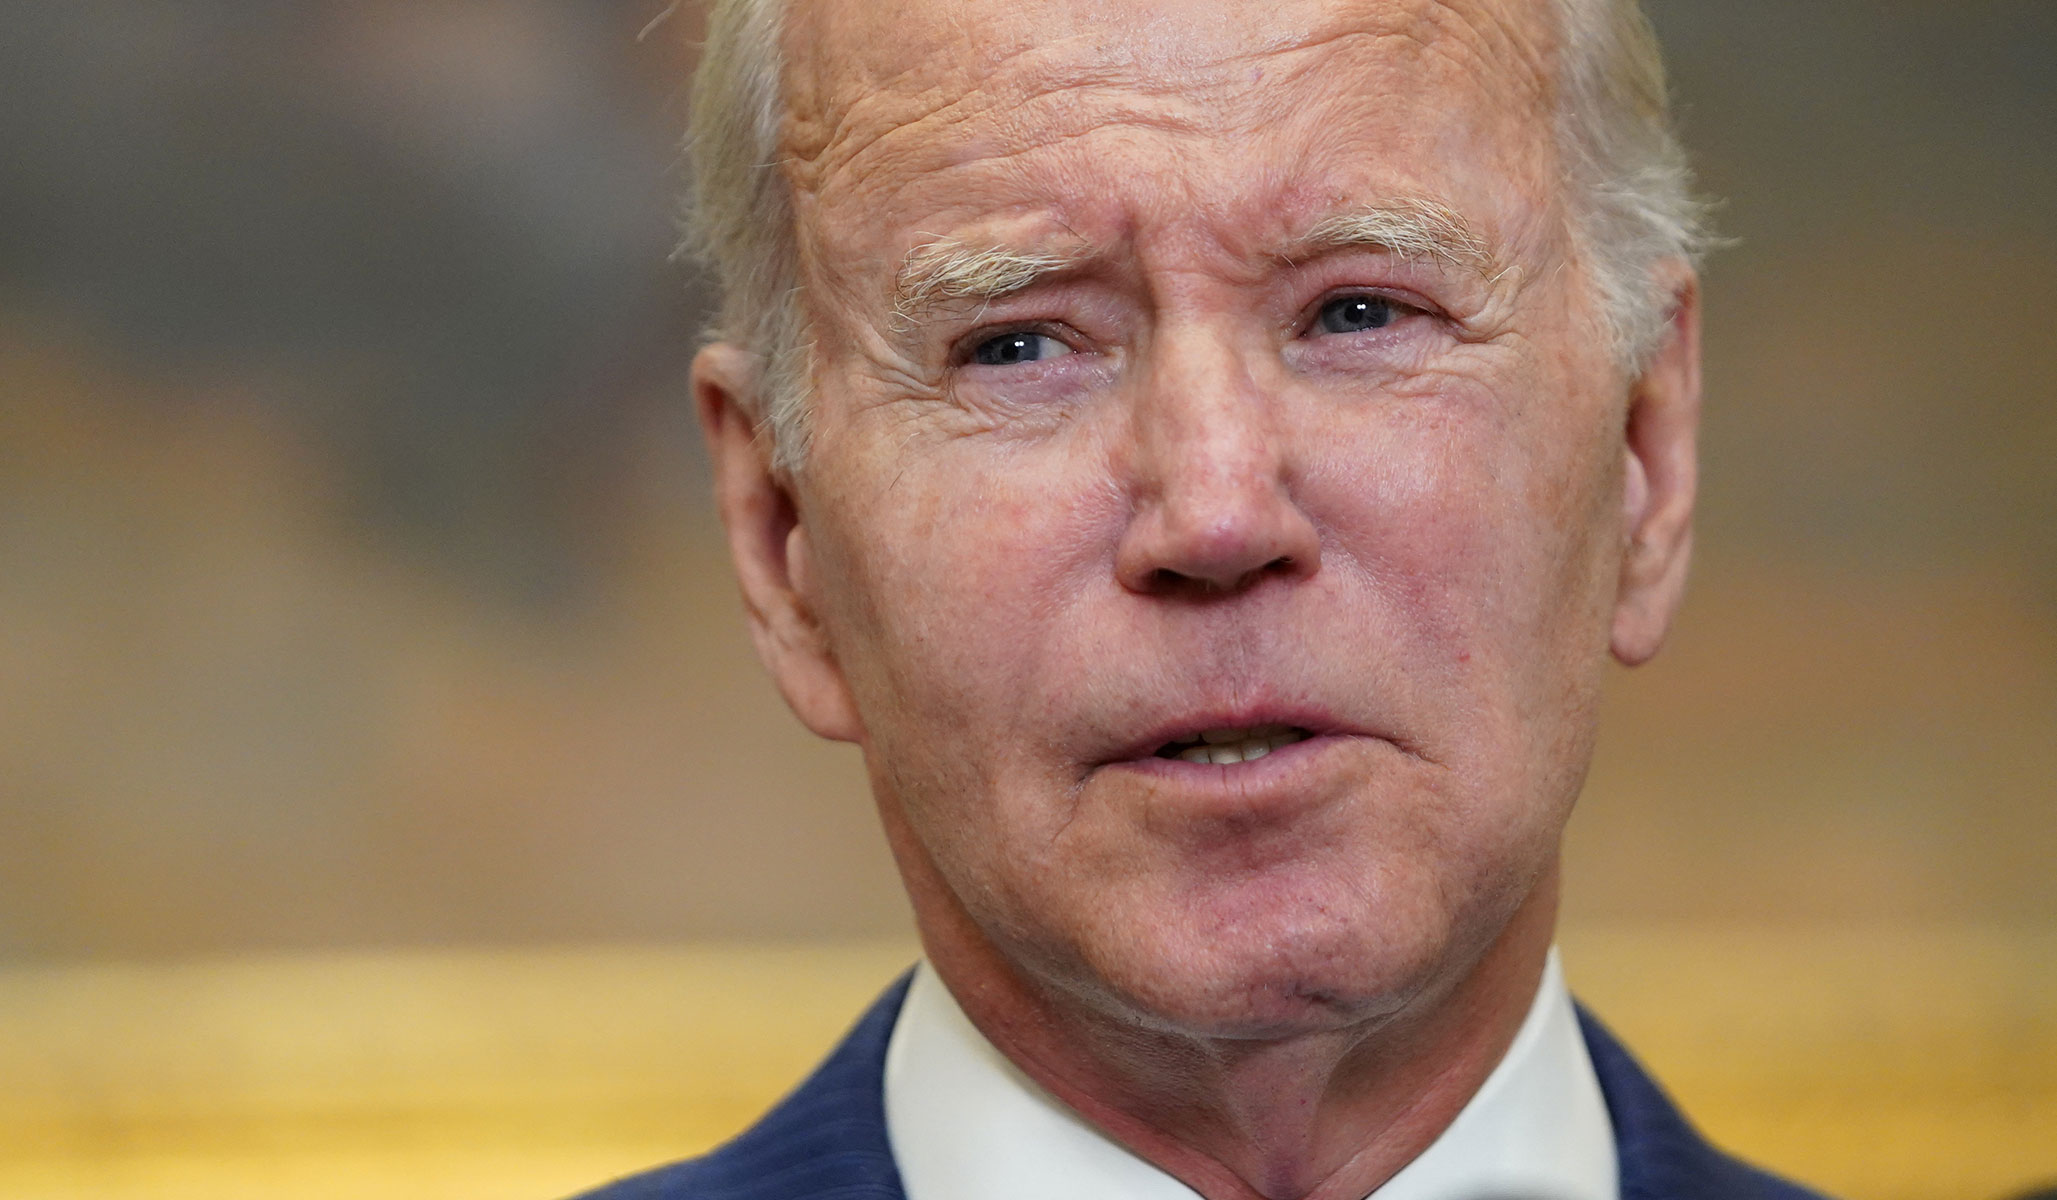 NextImg:Yes, Biden Is Too Old to Serve as President 